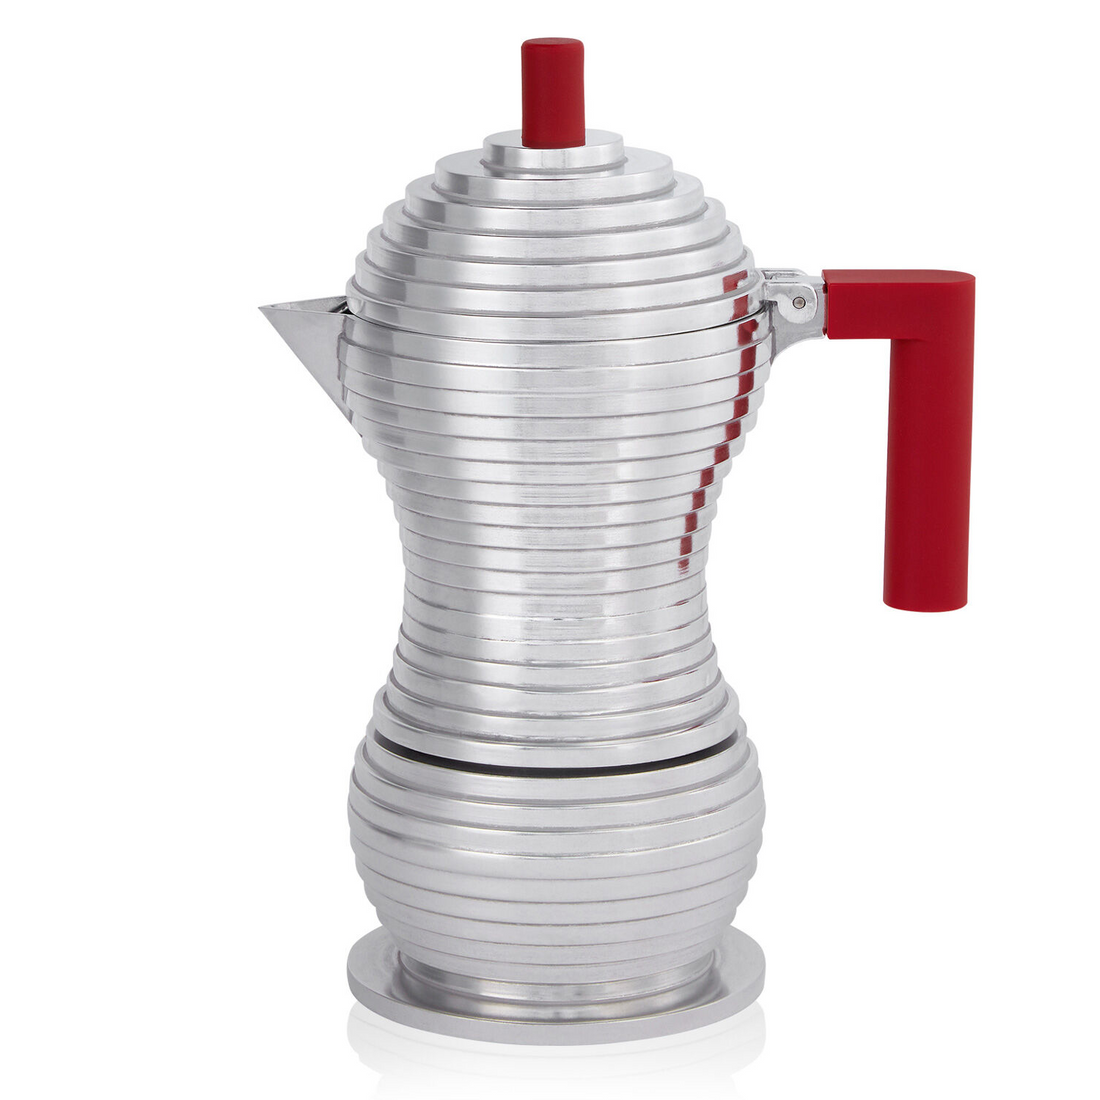 Illy Alessi Pulcina 3 Cup Moka Pot - Red – Whole Latte Love